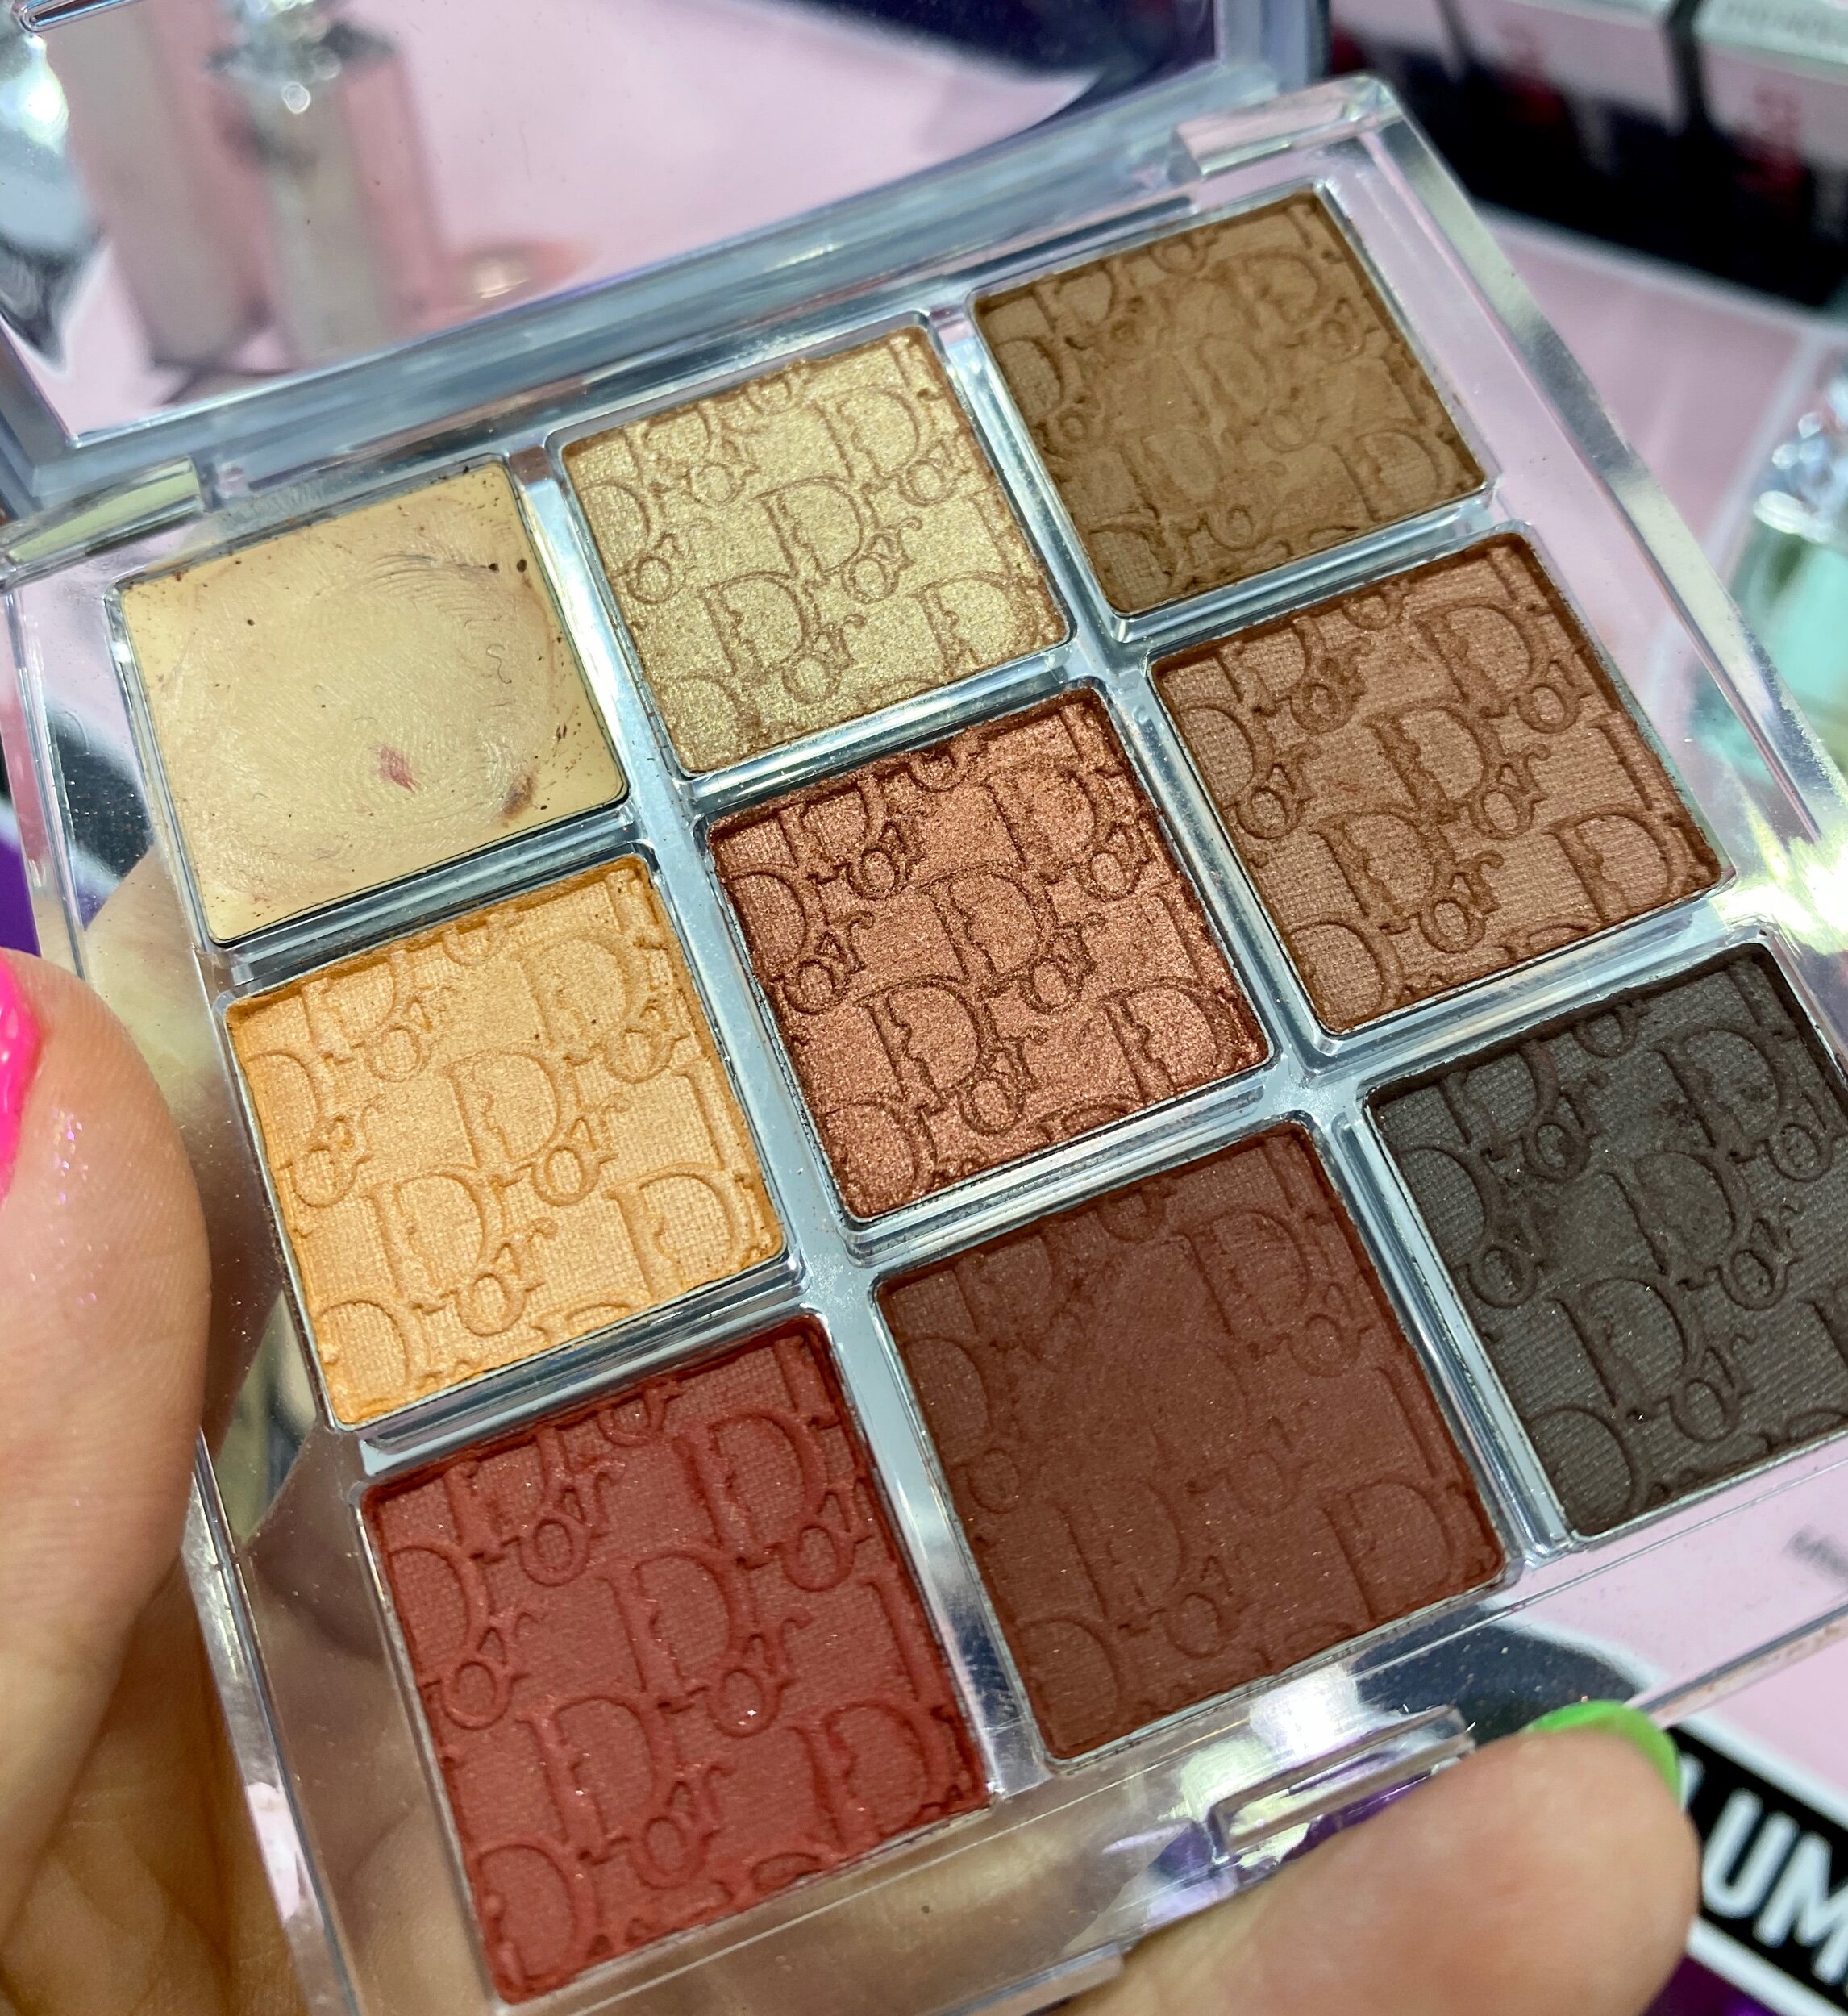 DIOR BACKSTAGE EYE PALETTE - Amber Neutral Swatches, Rosy Glow